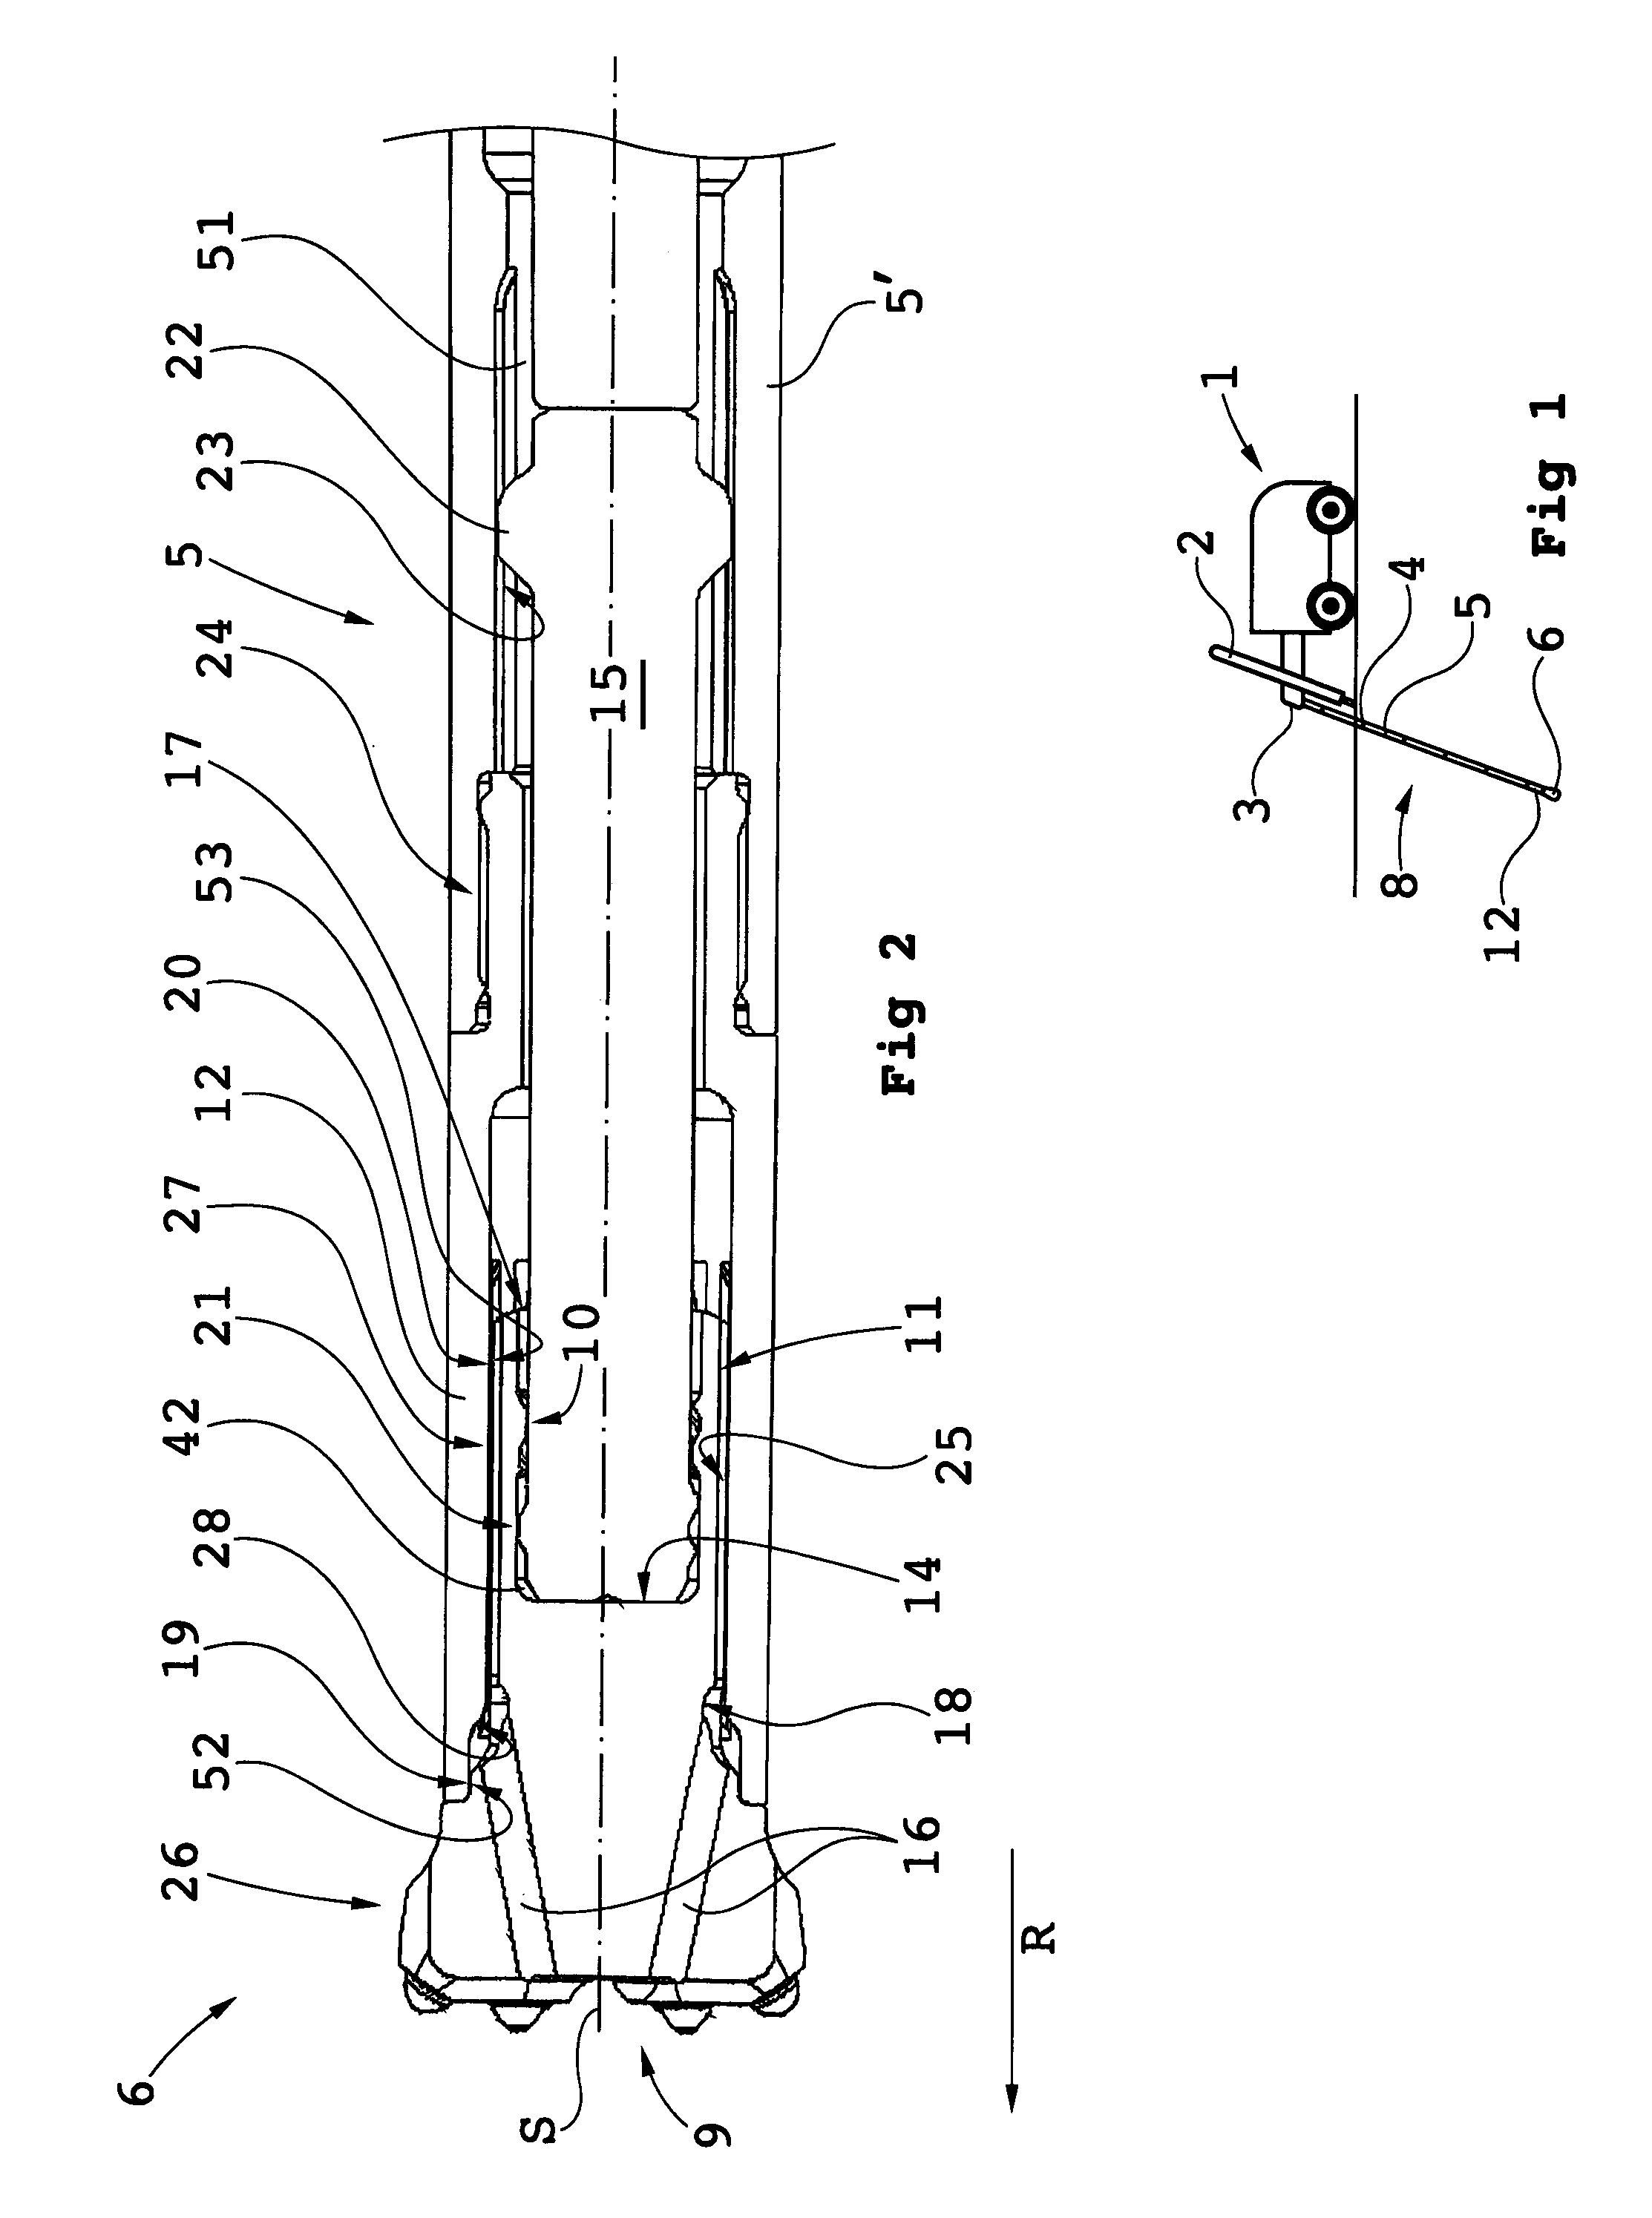 Device and system for percussion rock drilling